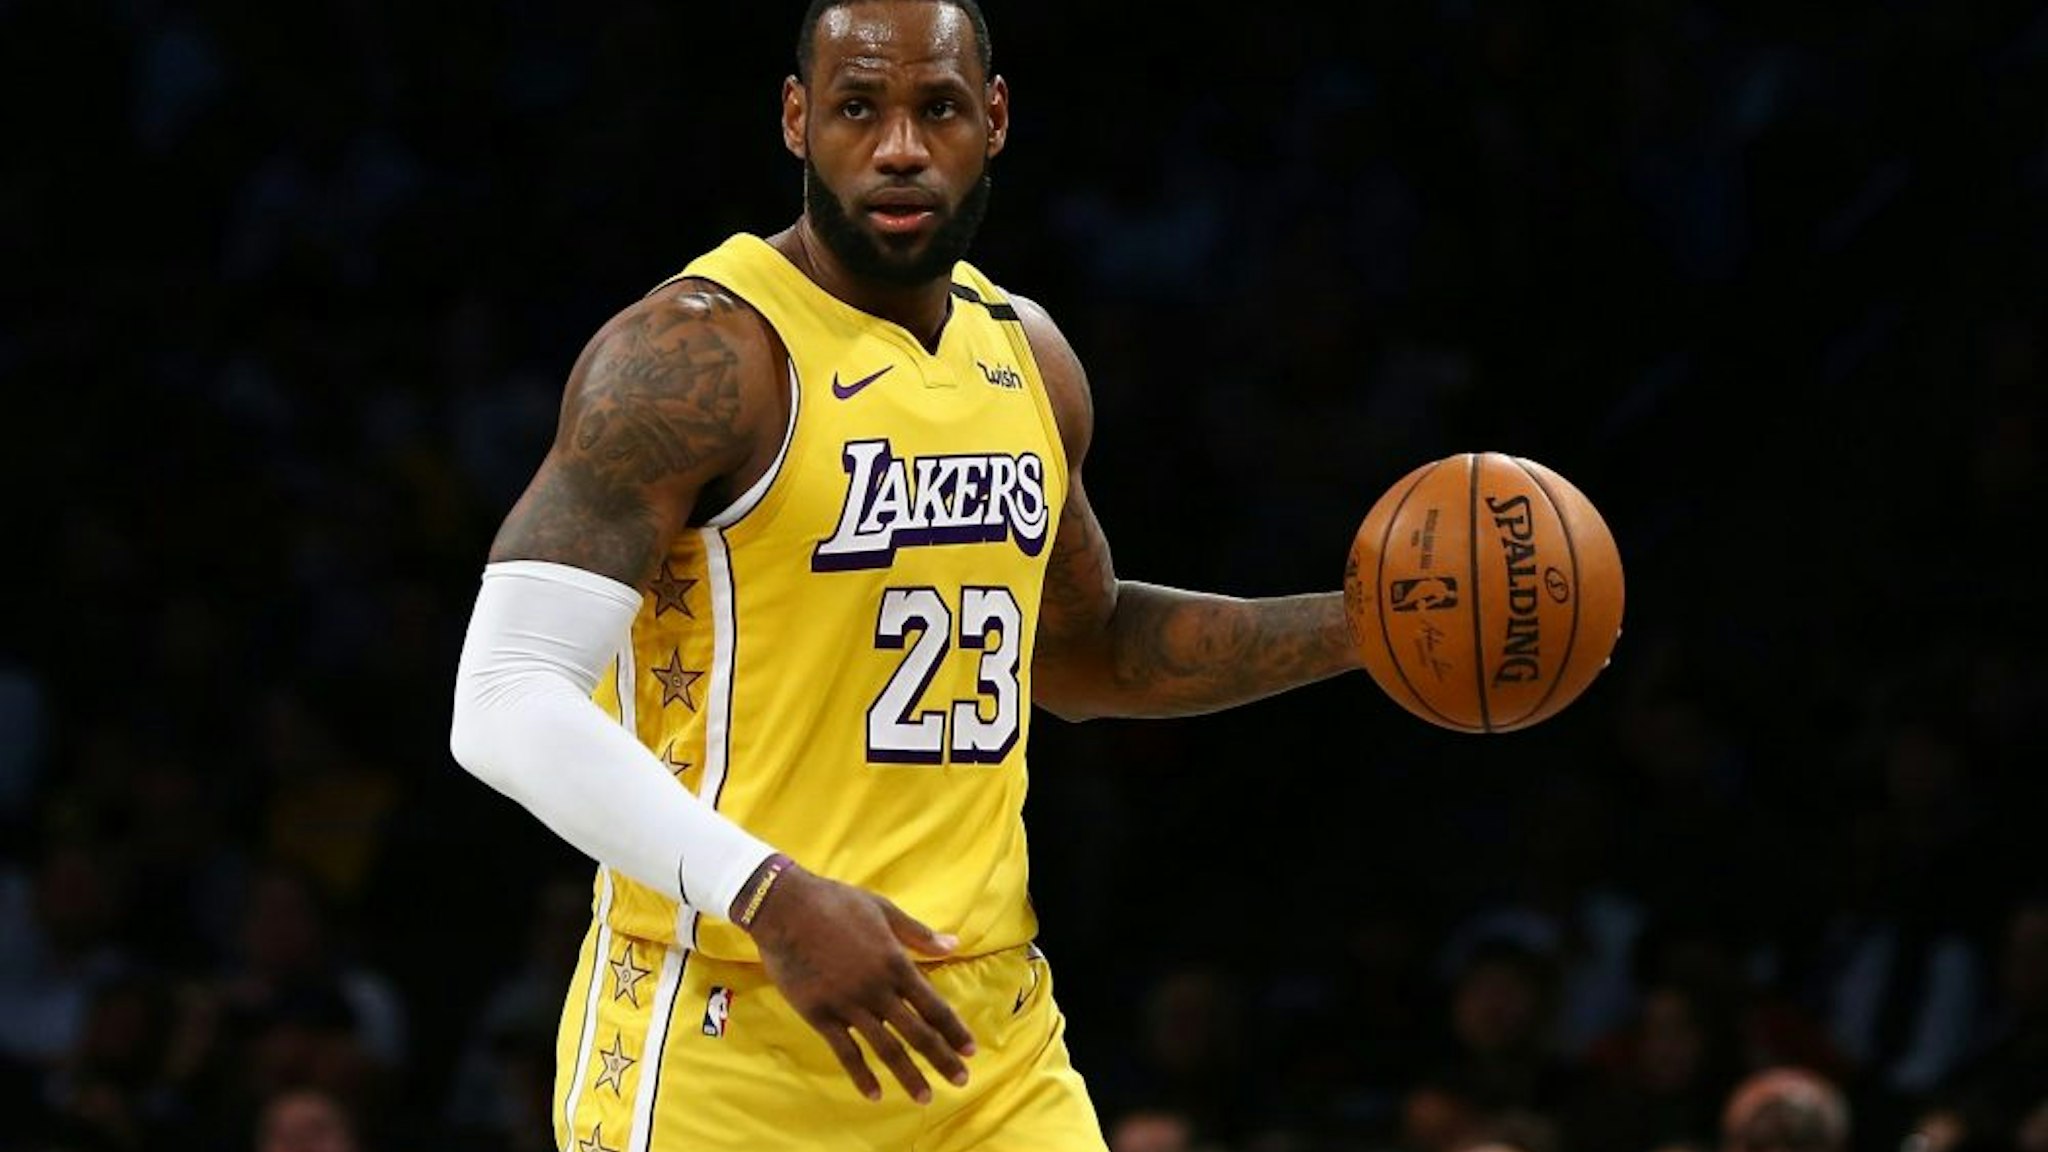 NEW YORK, NEW YORK - JANUARY 23: LeBron James #23 of the Los Angeles Lakers carries the ball against against the Brooklyn Nets at Barclays Center on January 23, 2020 in New York City. NOTE TO USER: User expressly acknowledges and agrees that, by downloading and or using this photograph, User is consenting to the terms and conditions of the Getty Images License Agreement.